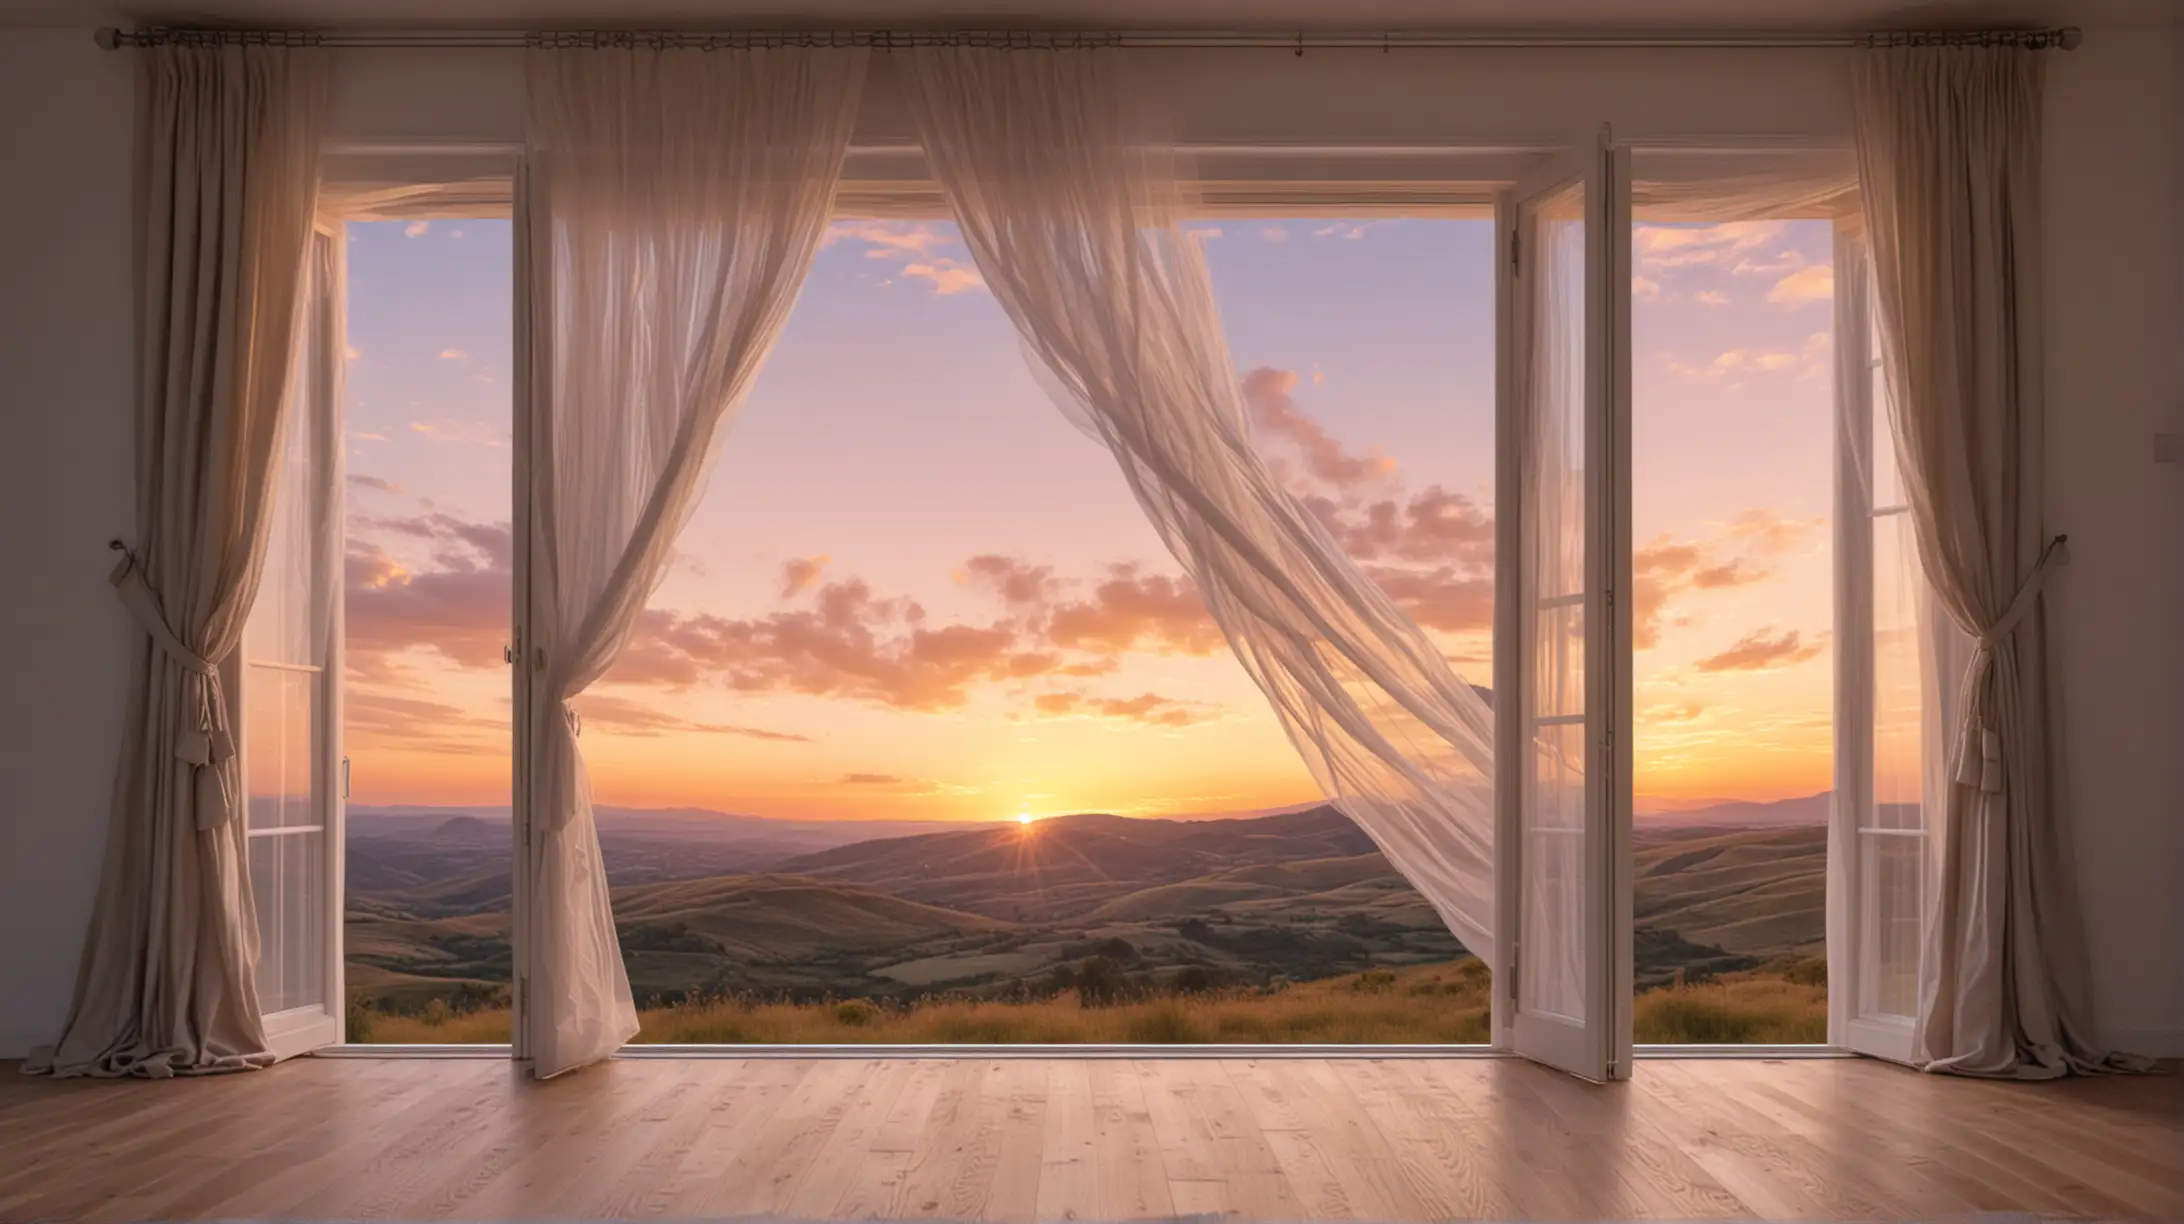 create a giant romantic window structure with curtains flying in the wind and two open doors positioned on a hill with a landscape of hills behind, romantic sunset, wide large frontal shot 16:9, 